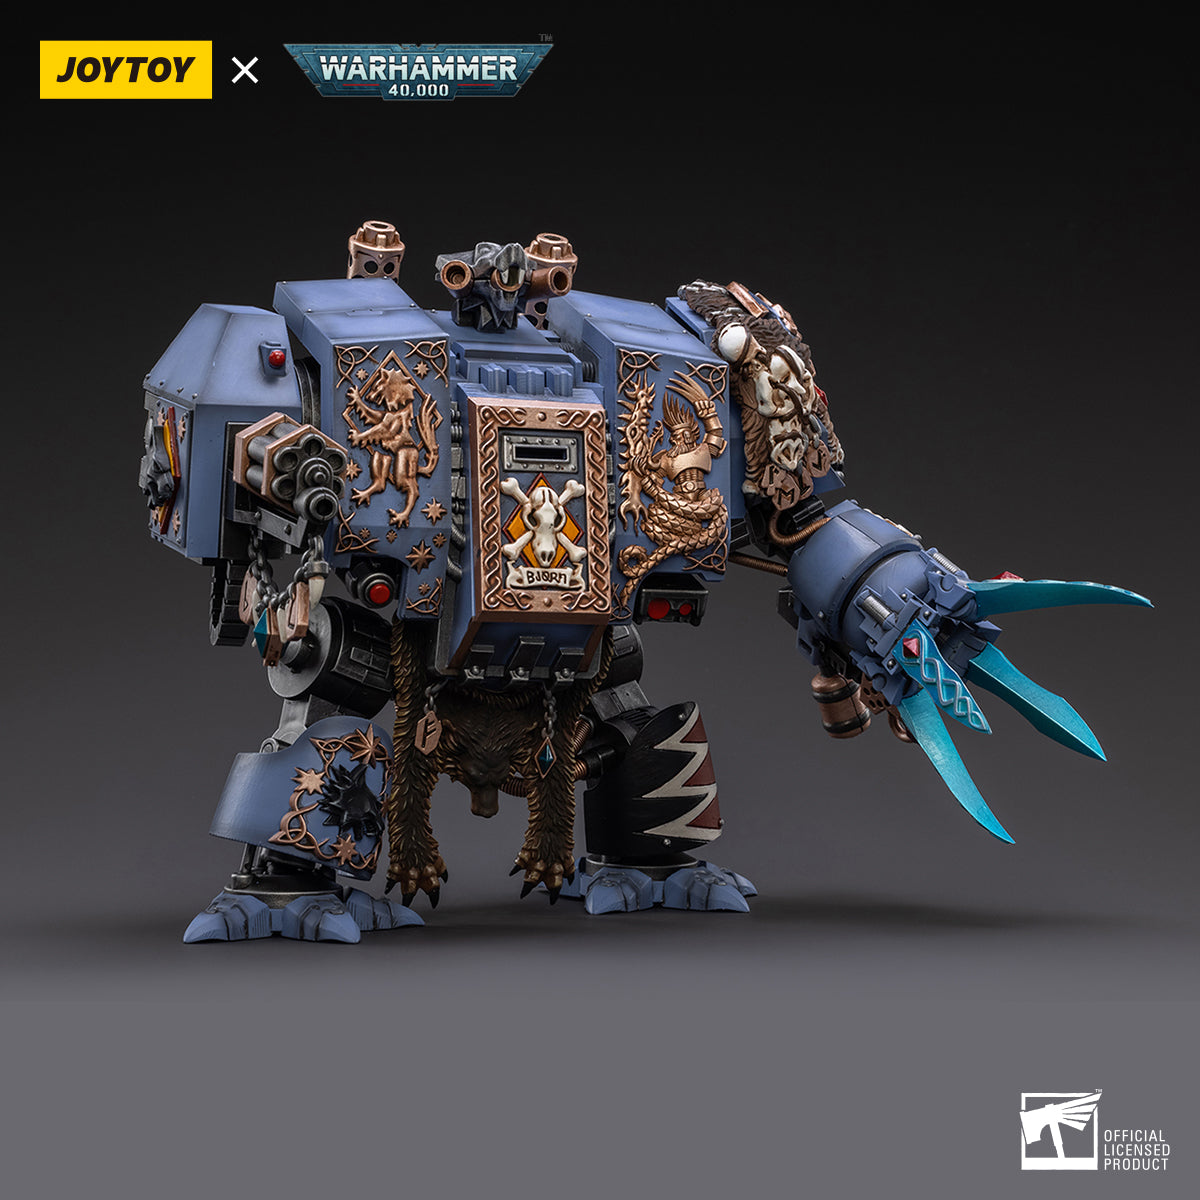 Warhammer Collectibles: 1/18 Scale Space Wolves Bjorn the Fell-Handed